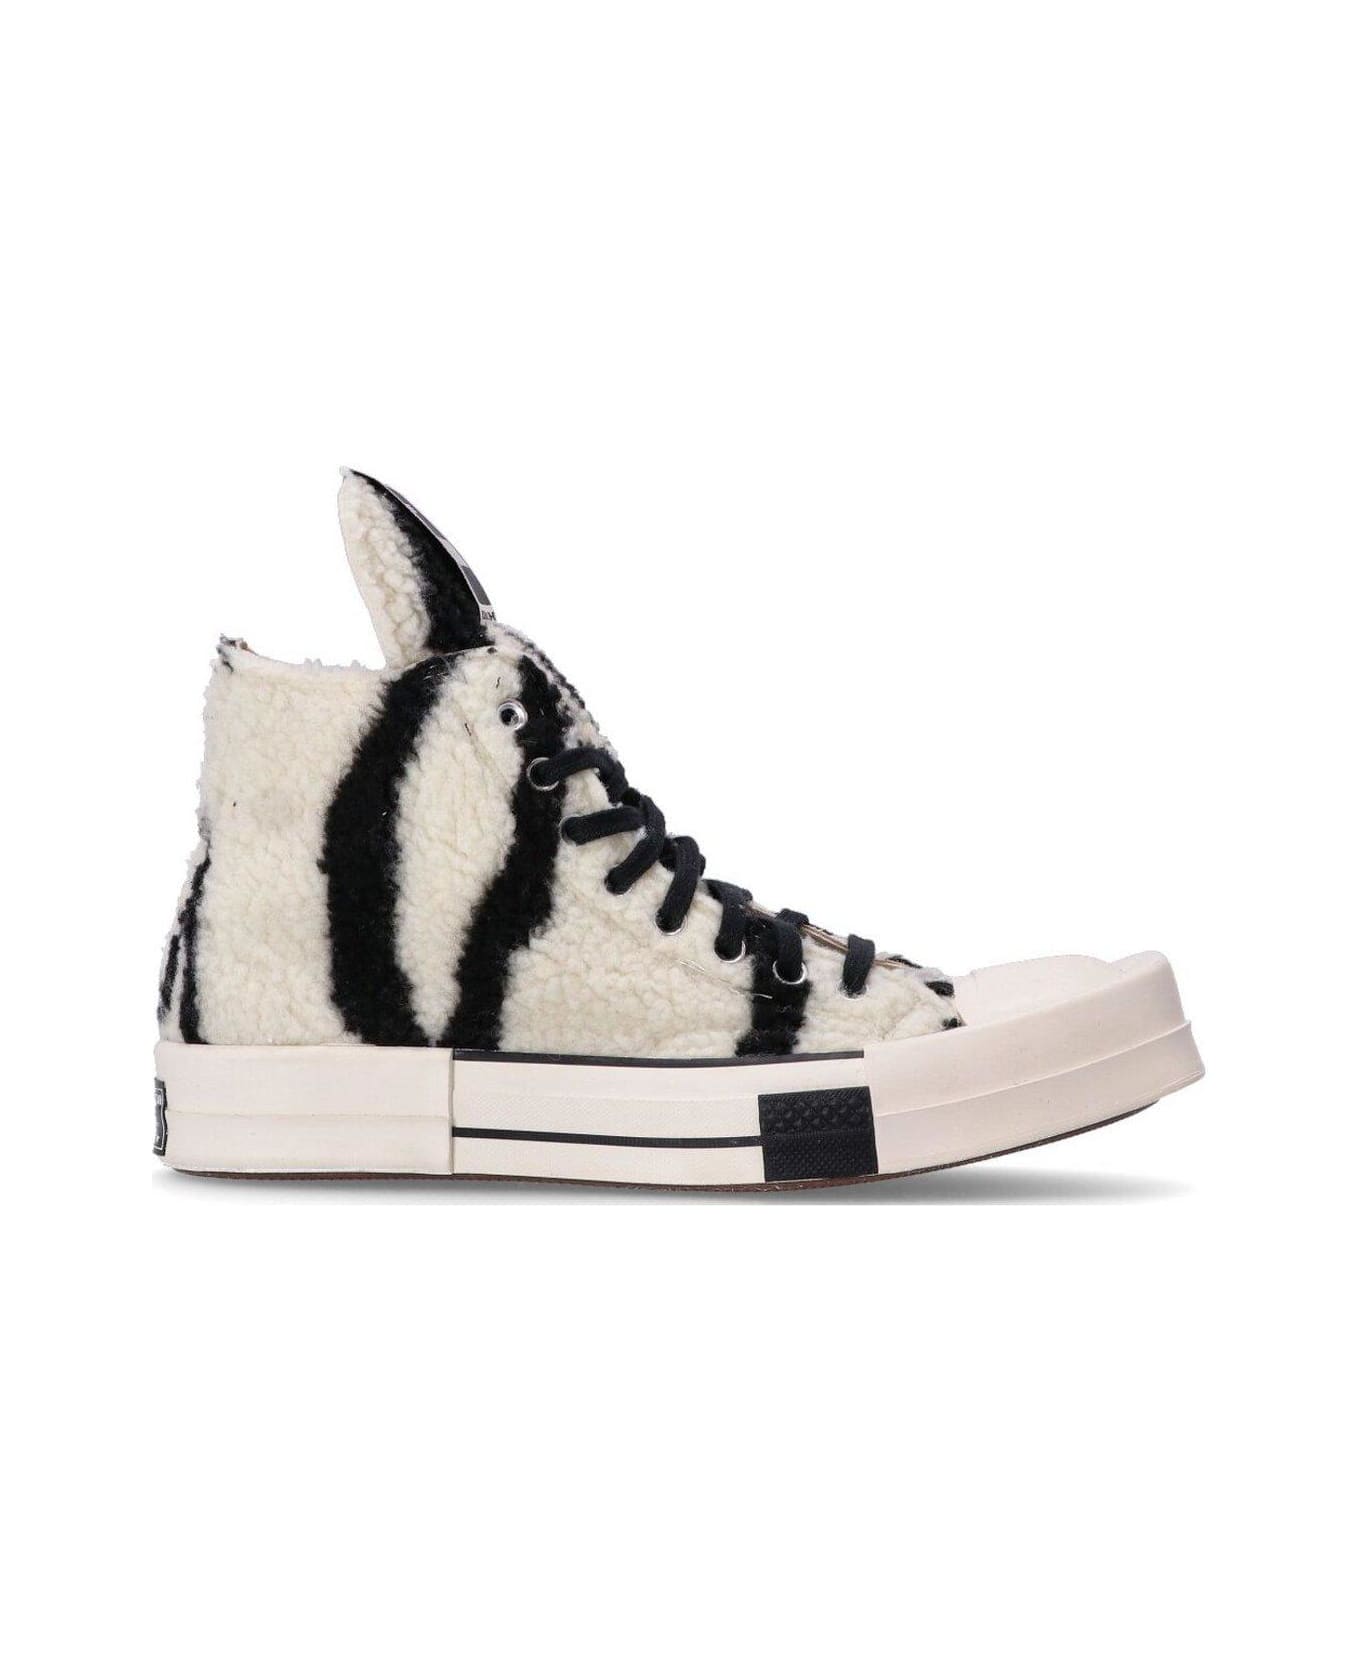 Rick Owens X Converse Turbodrk Lace-up Sneakers - 0809